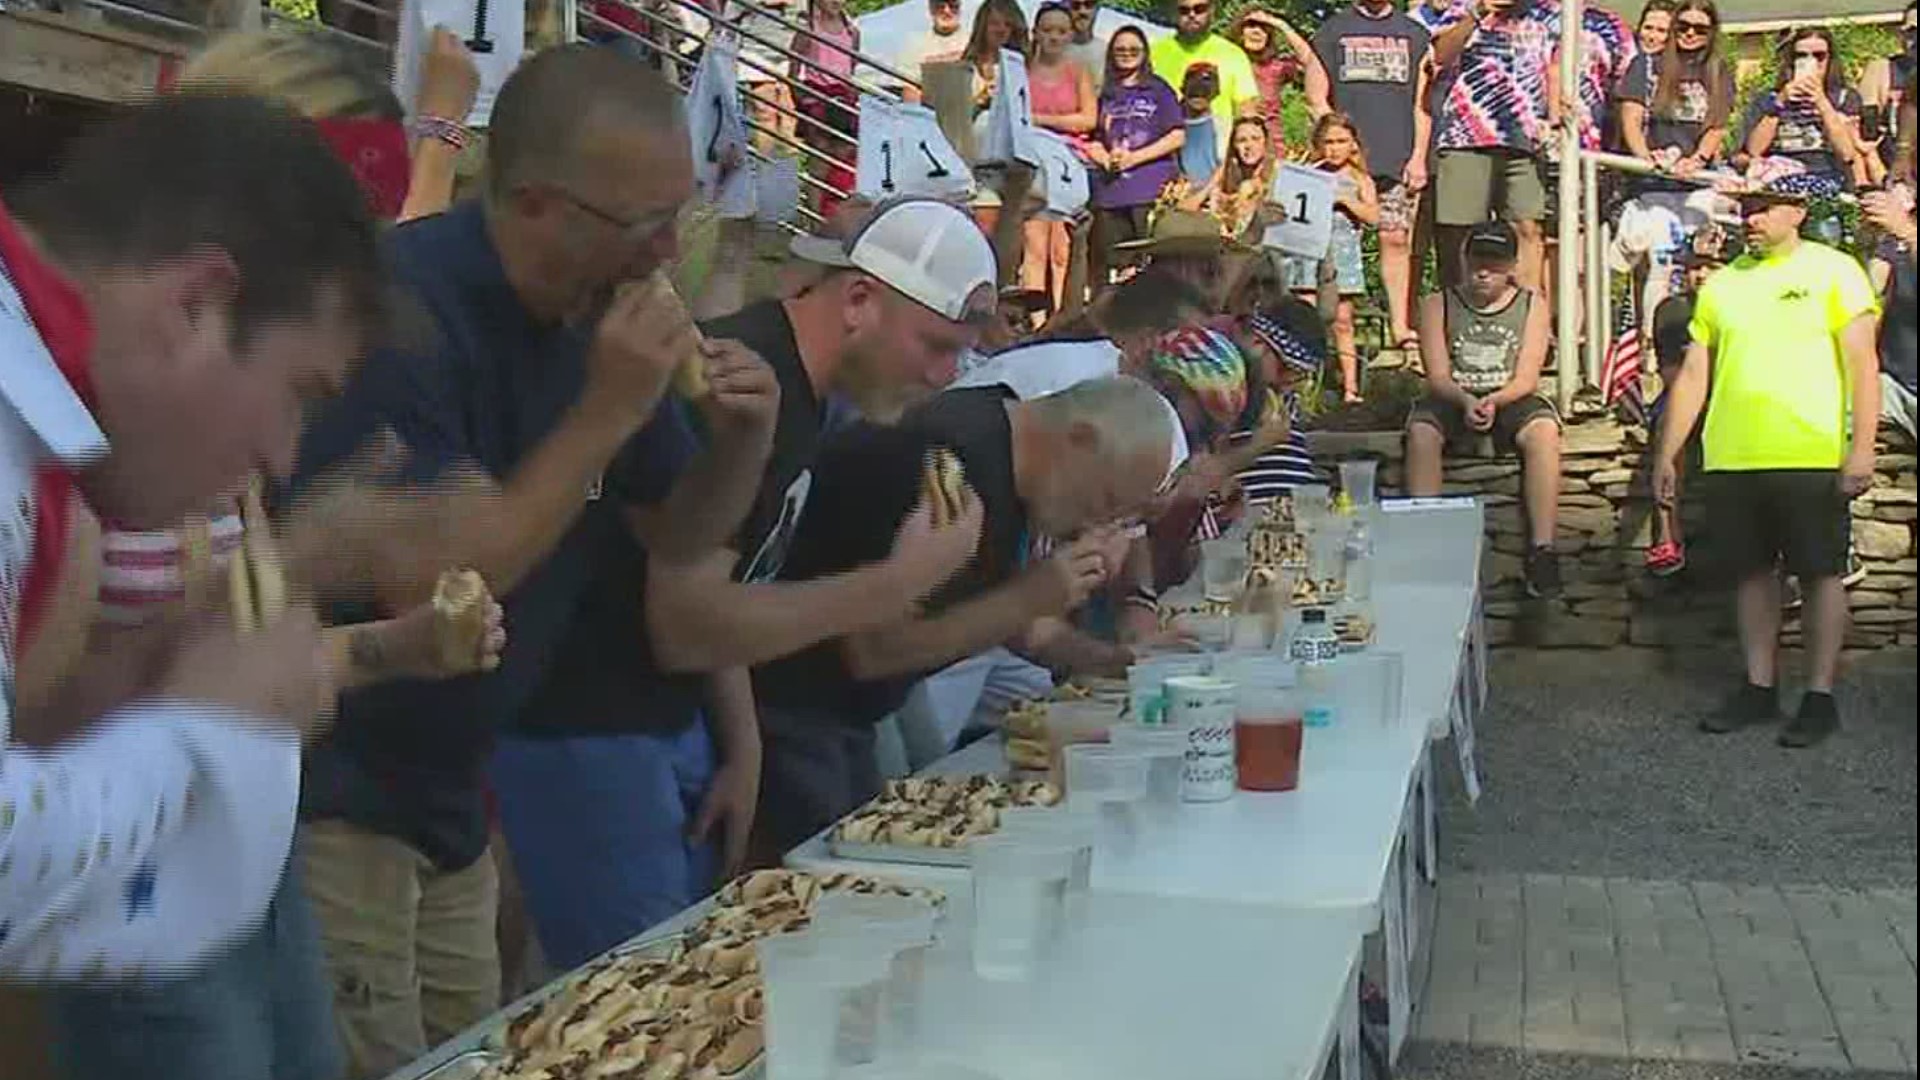 Folks in Luzerne County took a cue from Nathan's and had their own hot dog eating contest on Sunday.